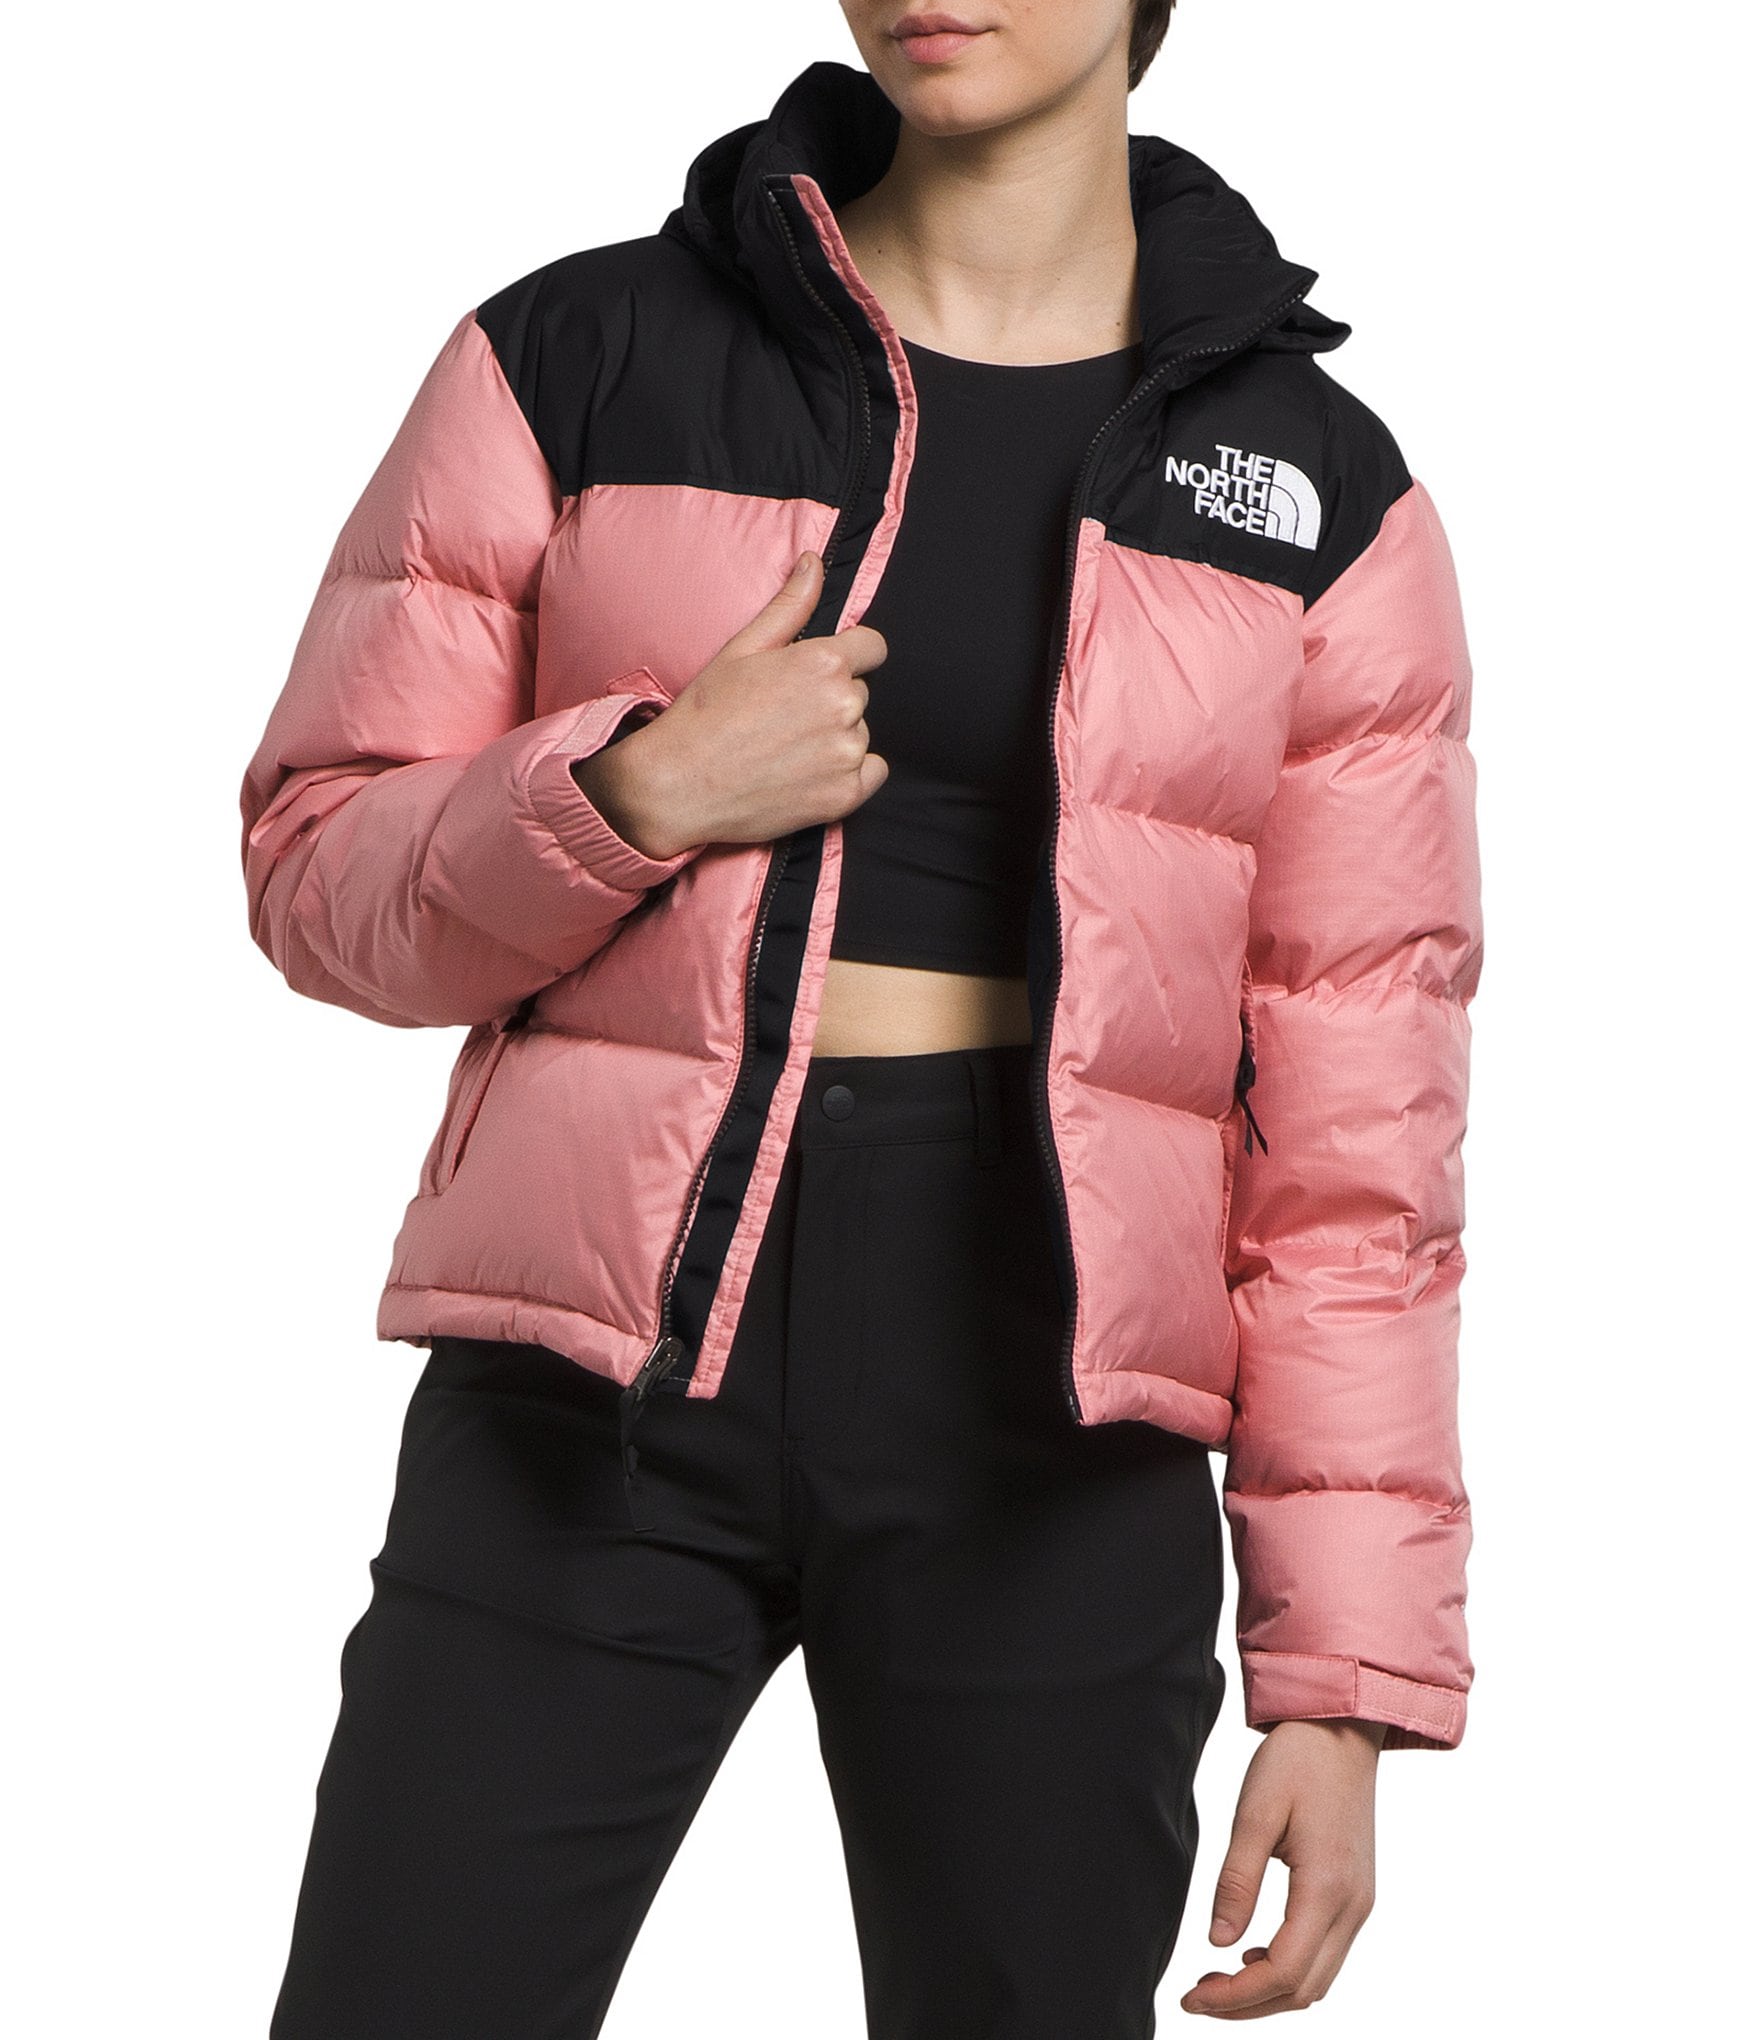 Nouveau The North Face Puffer Jacket 700 Down Maroc